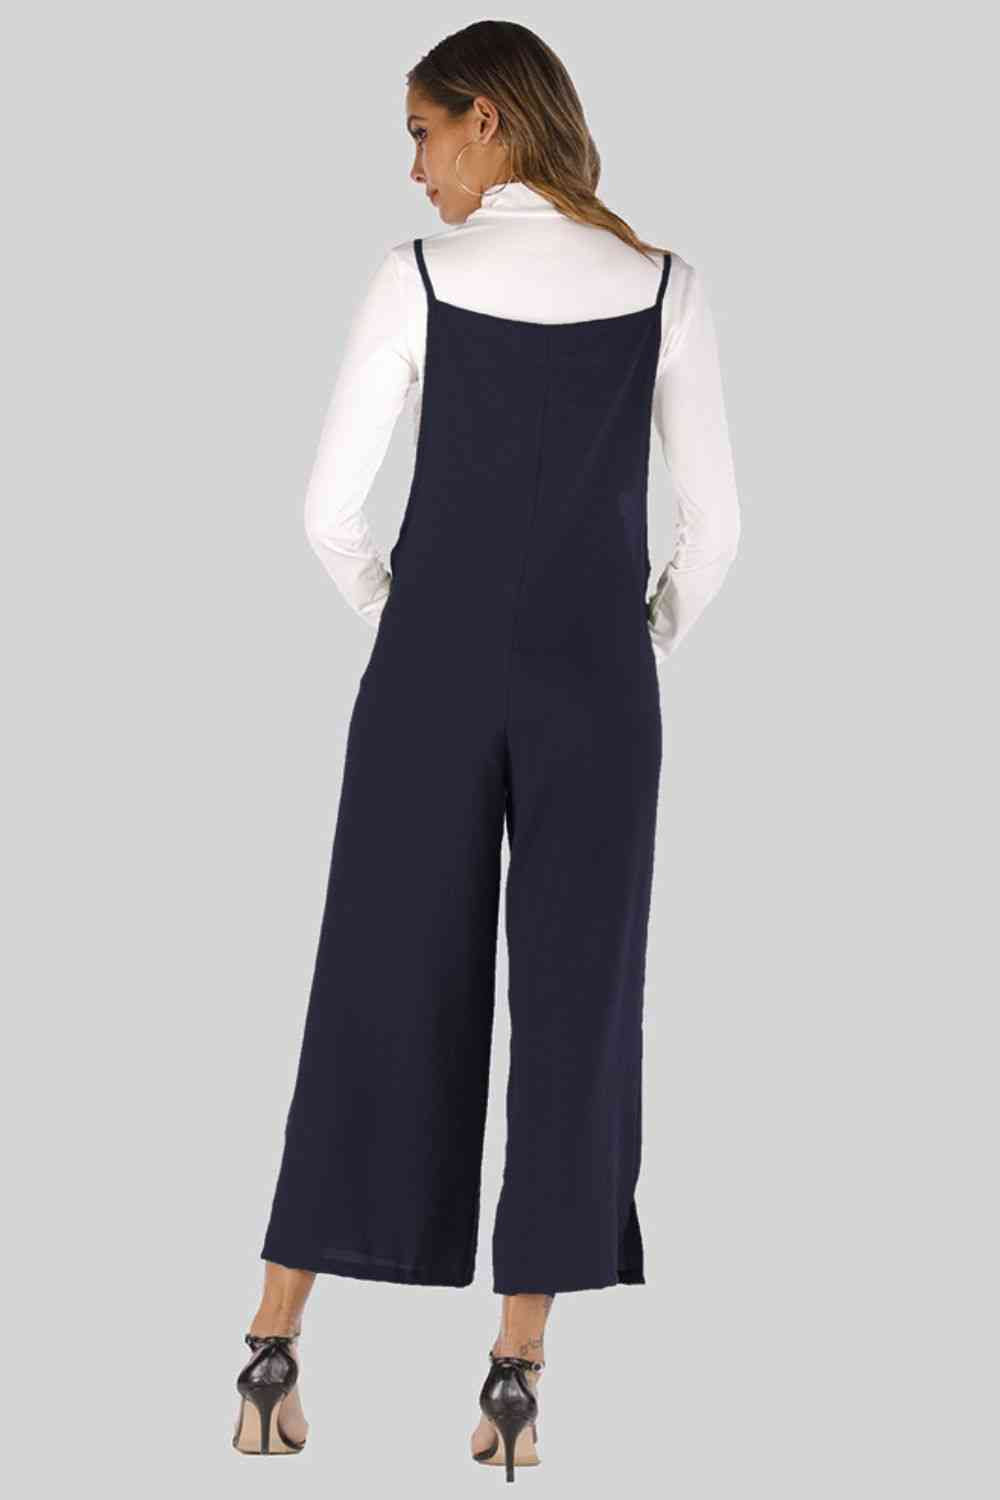 Full Size CoverTheBasics Cropped Wide Leg Overalls with Pockets